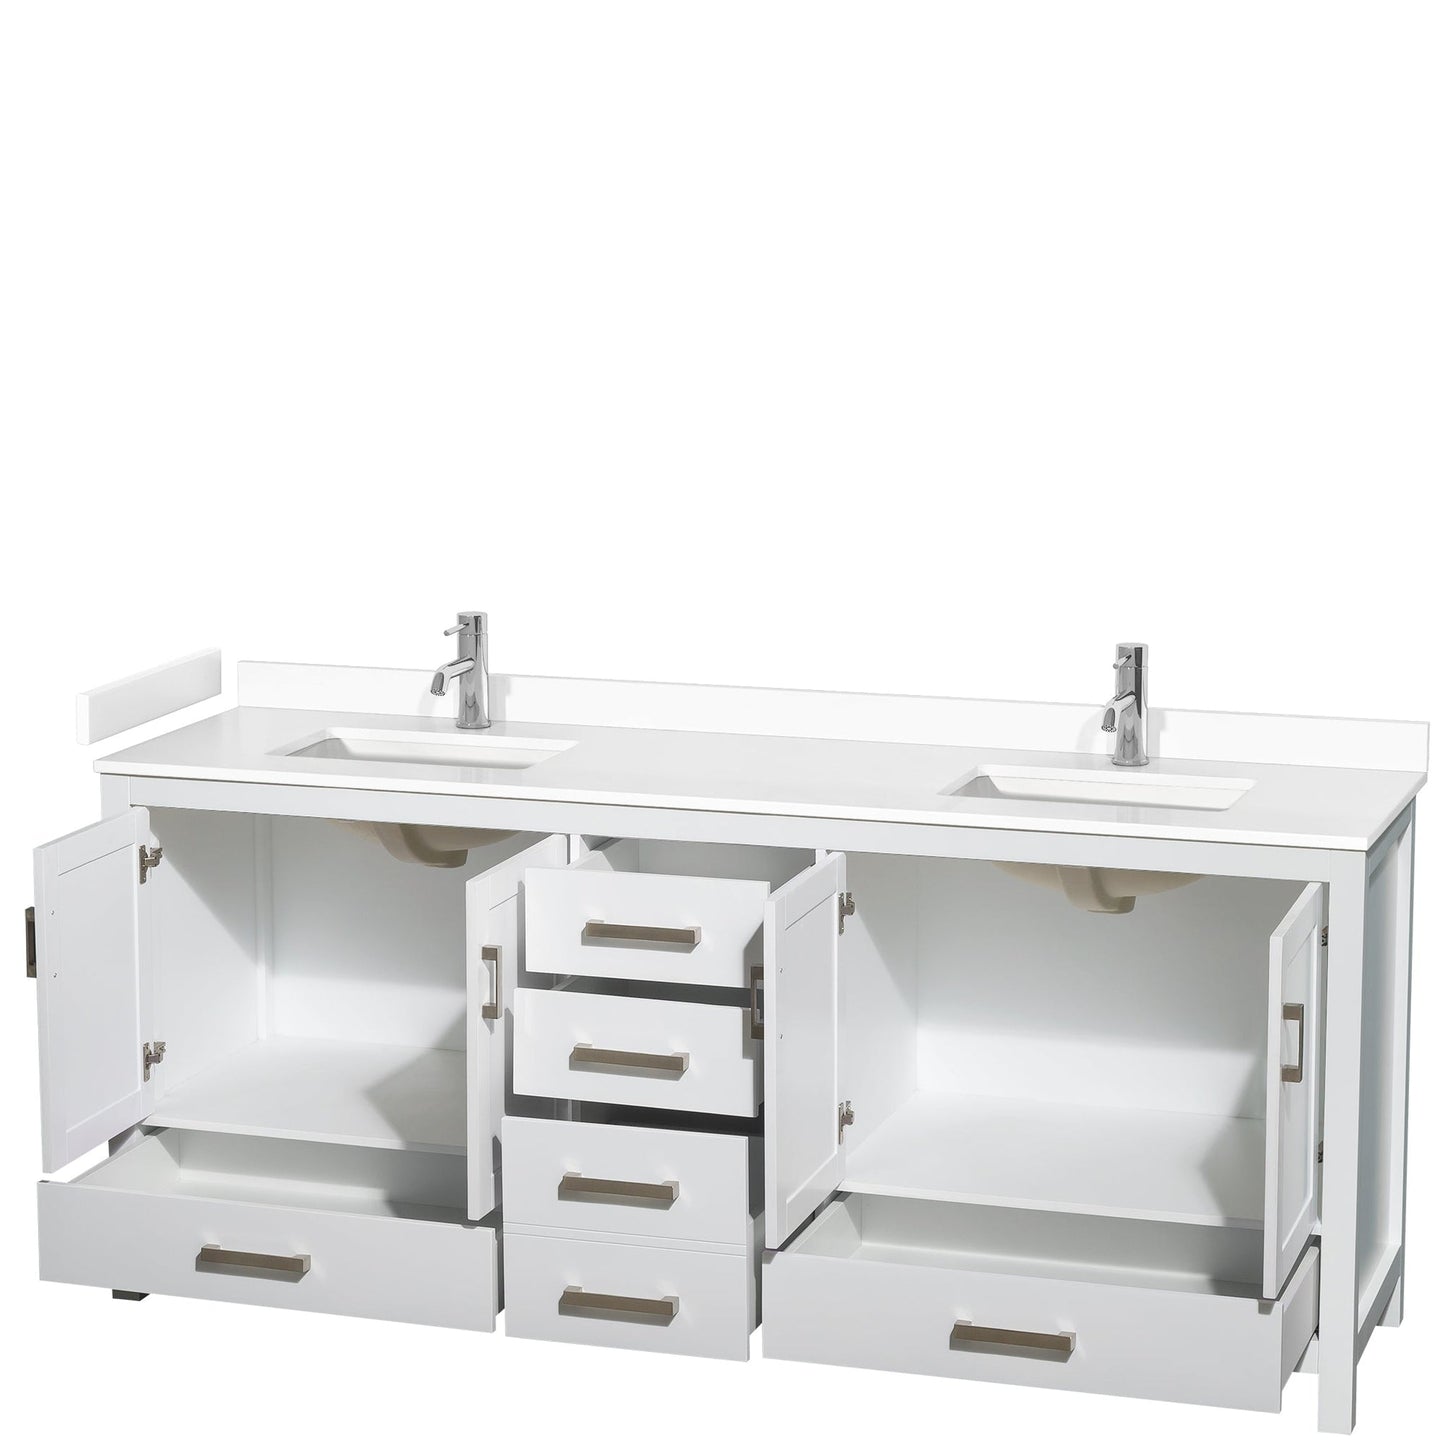 Wyndham Collection Sheffield 80" Double Bathroom Vanity in White, White Cultured Marble Countertop, Undermount Square Sinks, No Mirror